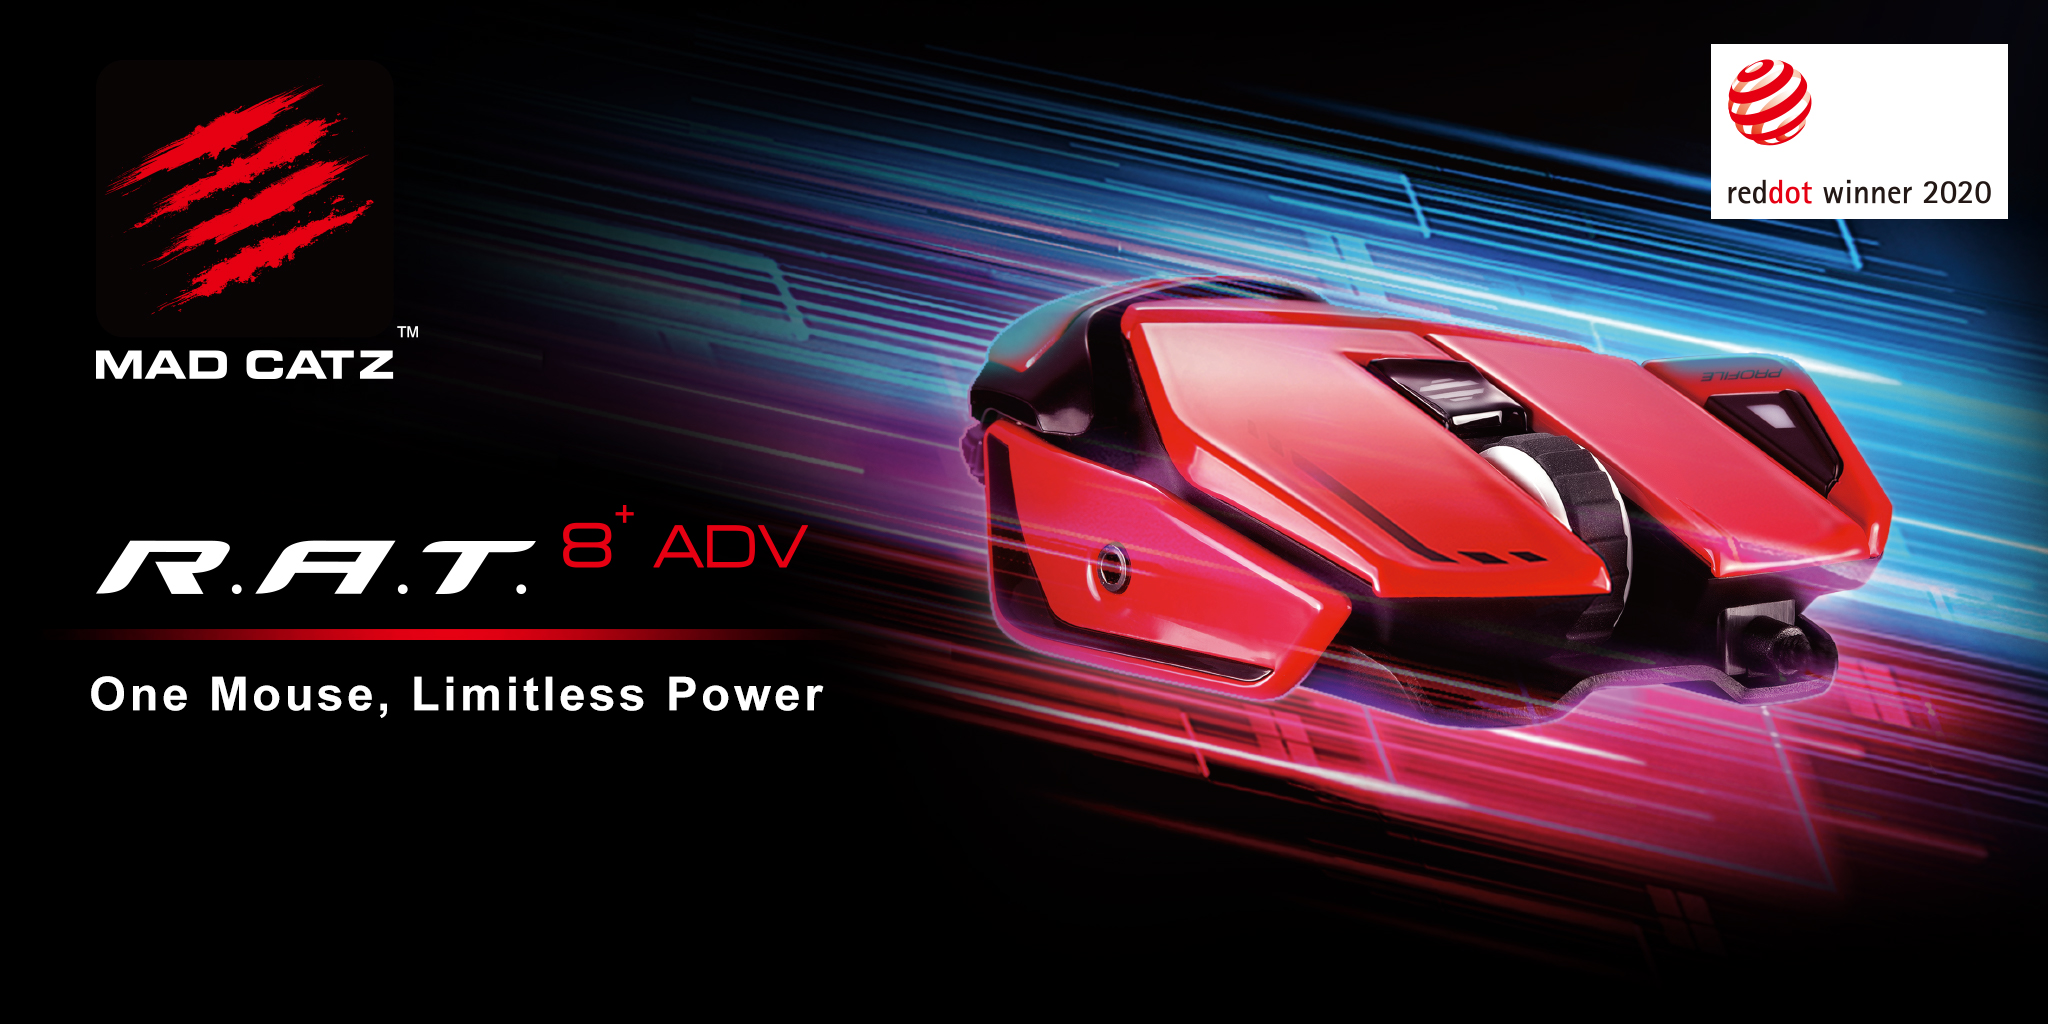 Winner of the Red Dot Award for Product Design 2020, the R.A.T. 8+ ADV is designed for the professional gamer with blisteringly fast performance